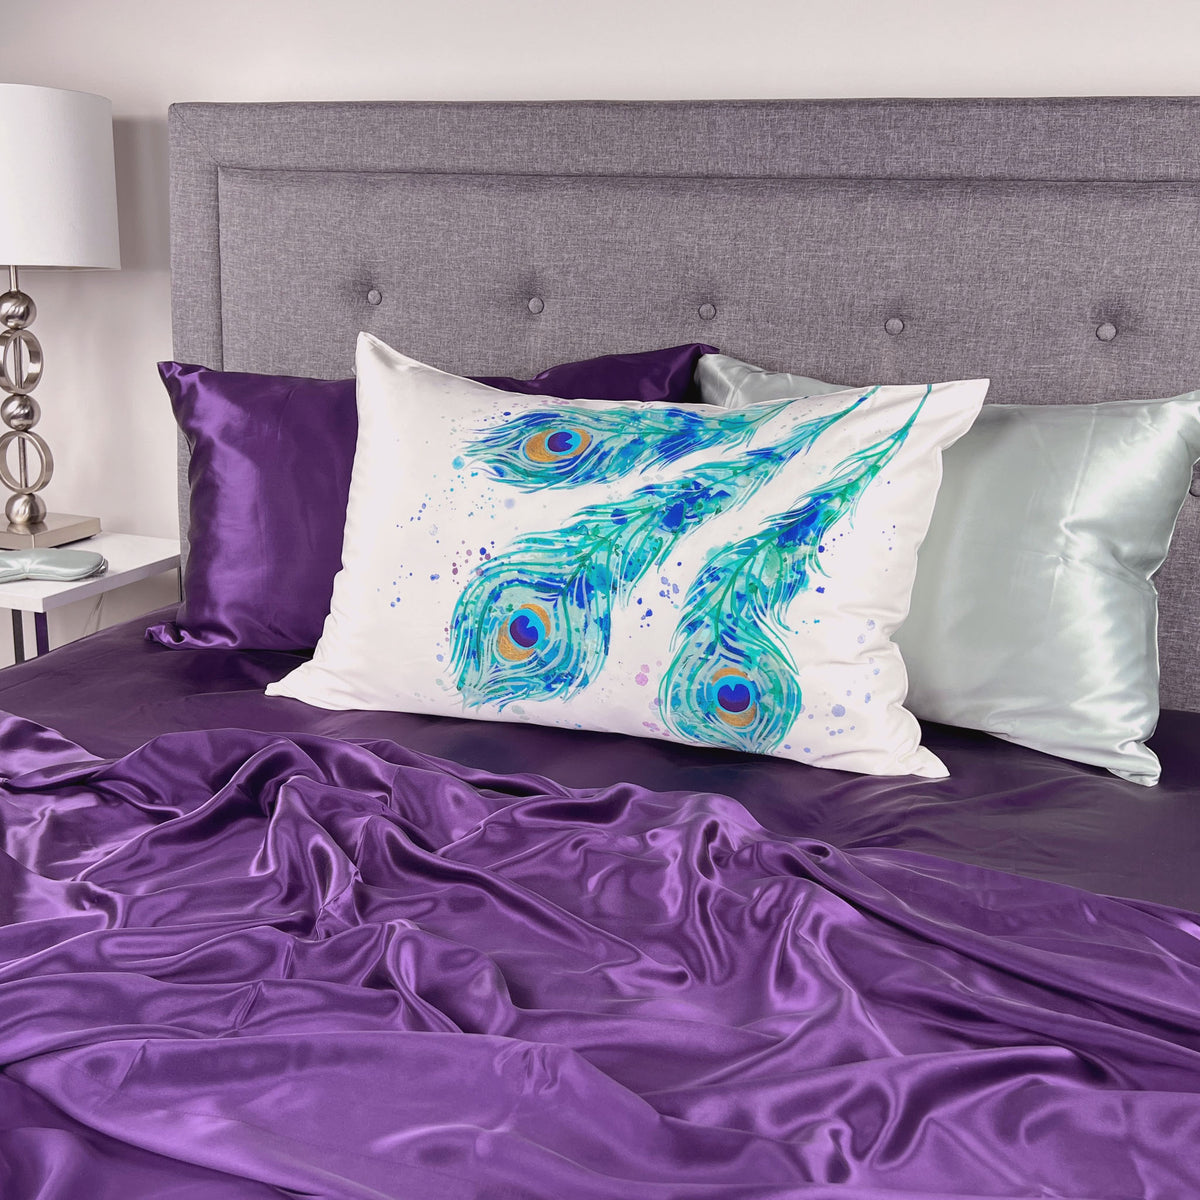 Mulberry Park Silks Peacock Feathers Silk Pillowcase on bed